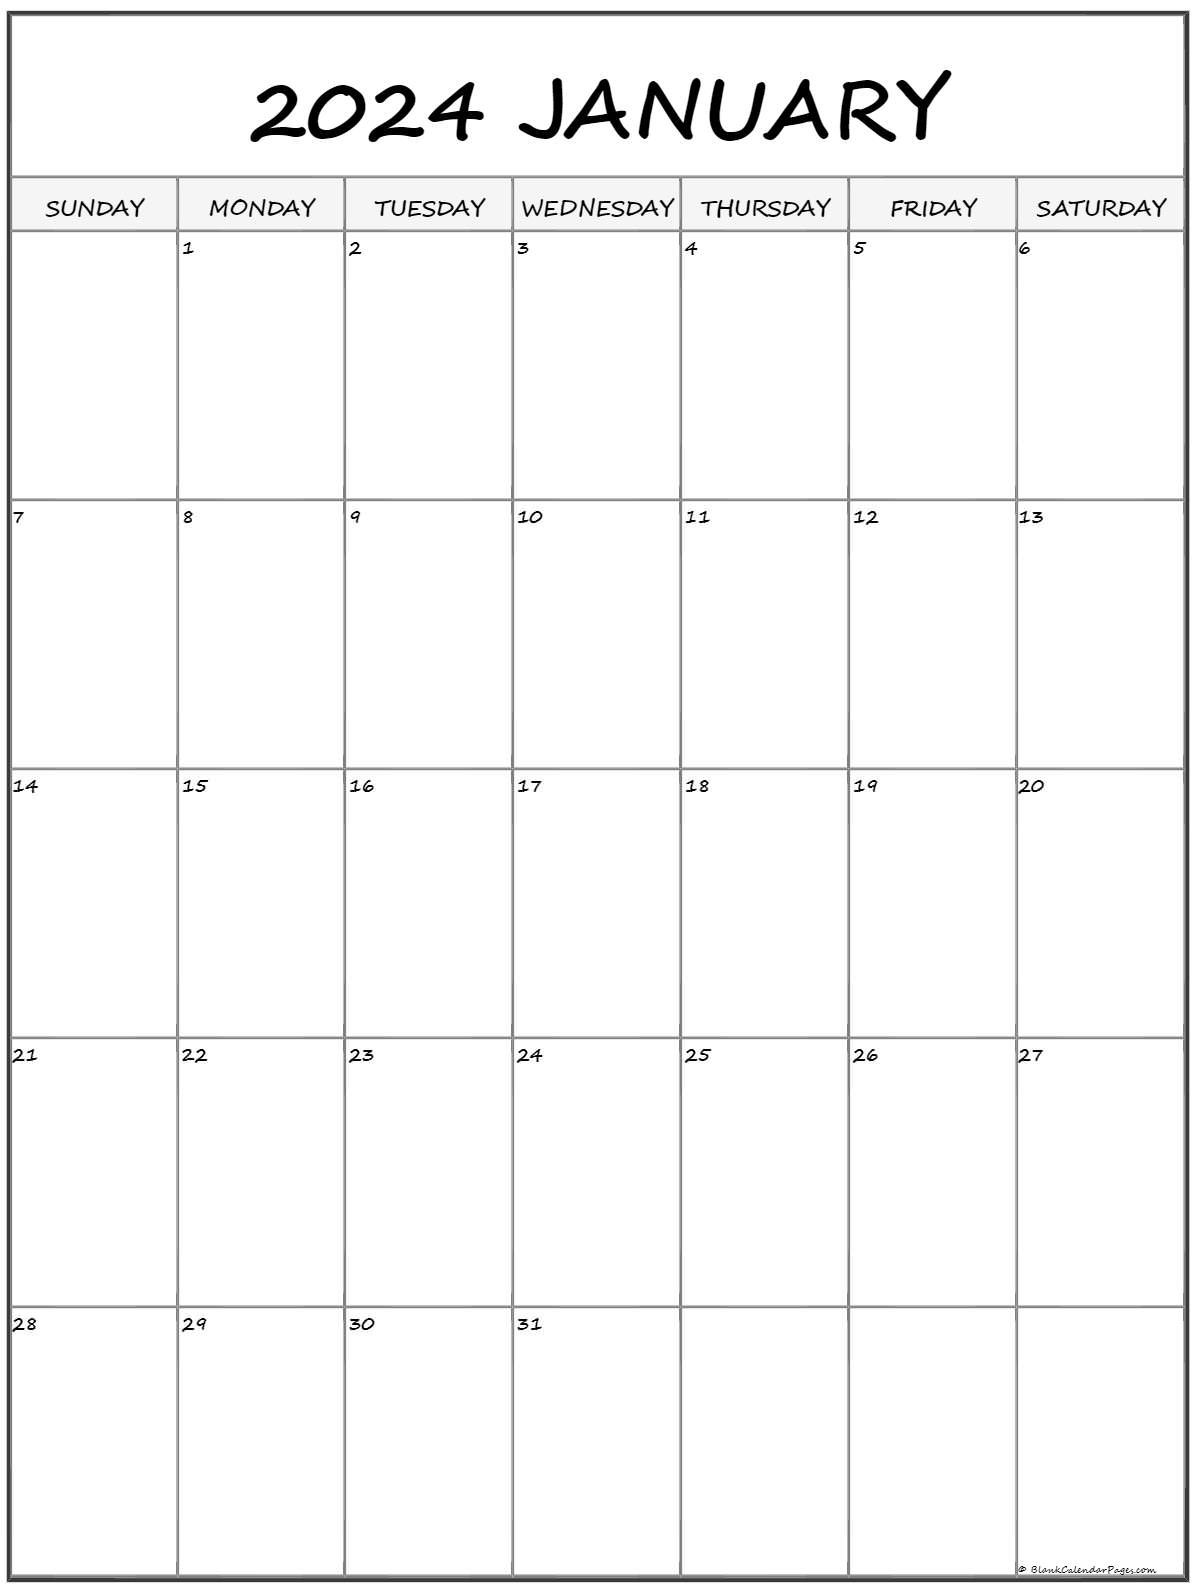 free-portrait-printable-calendars-2022-images-and-photos-finder